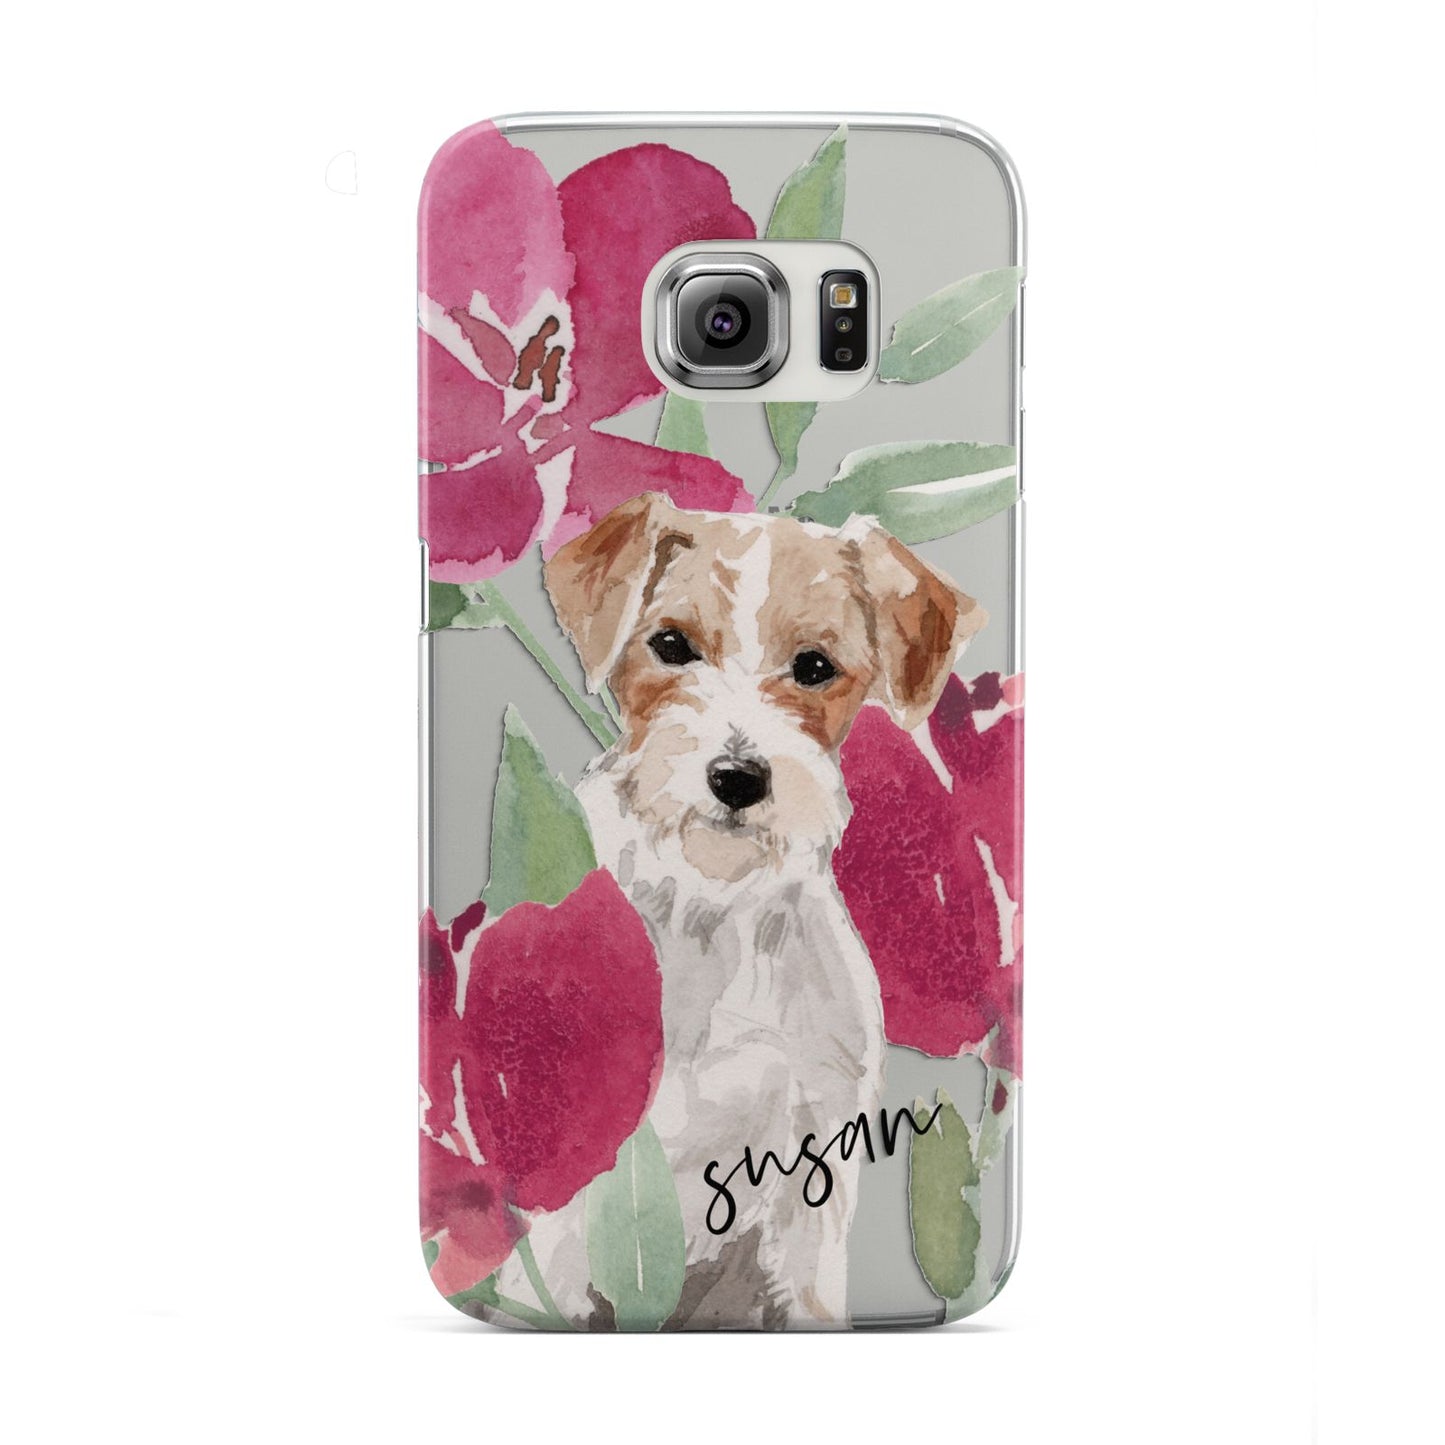 Personalised Jack Russel Samsung Galaxy S6 Edge Case